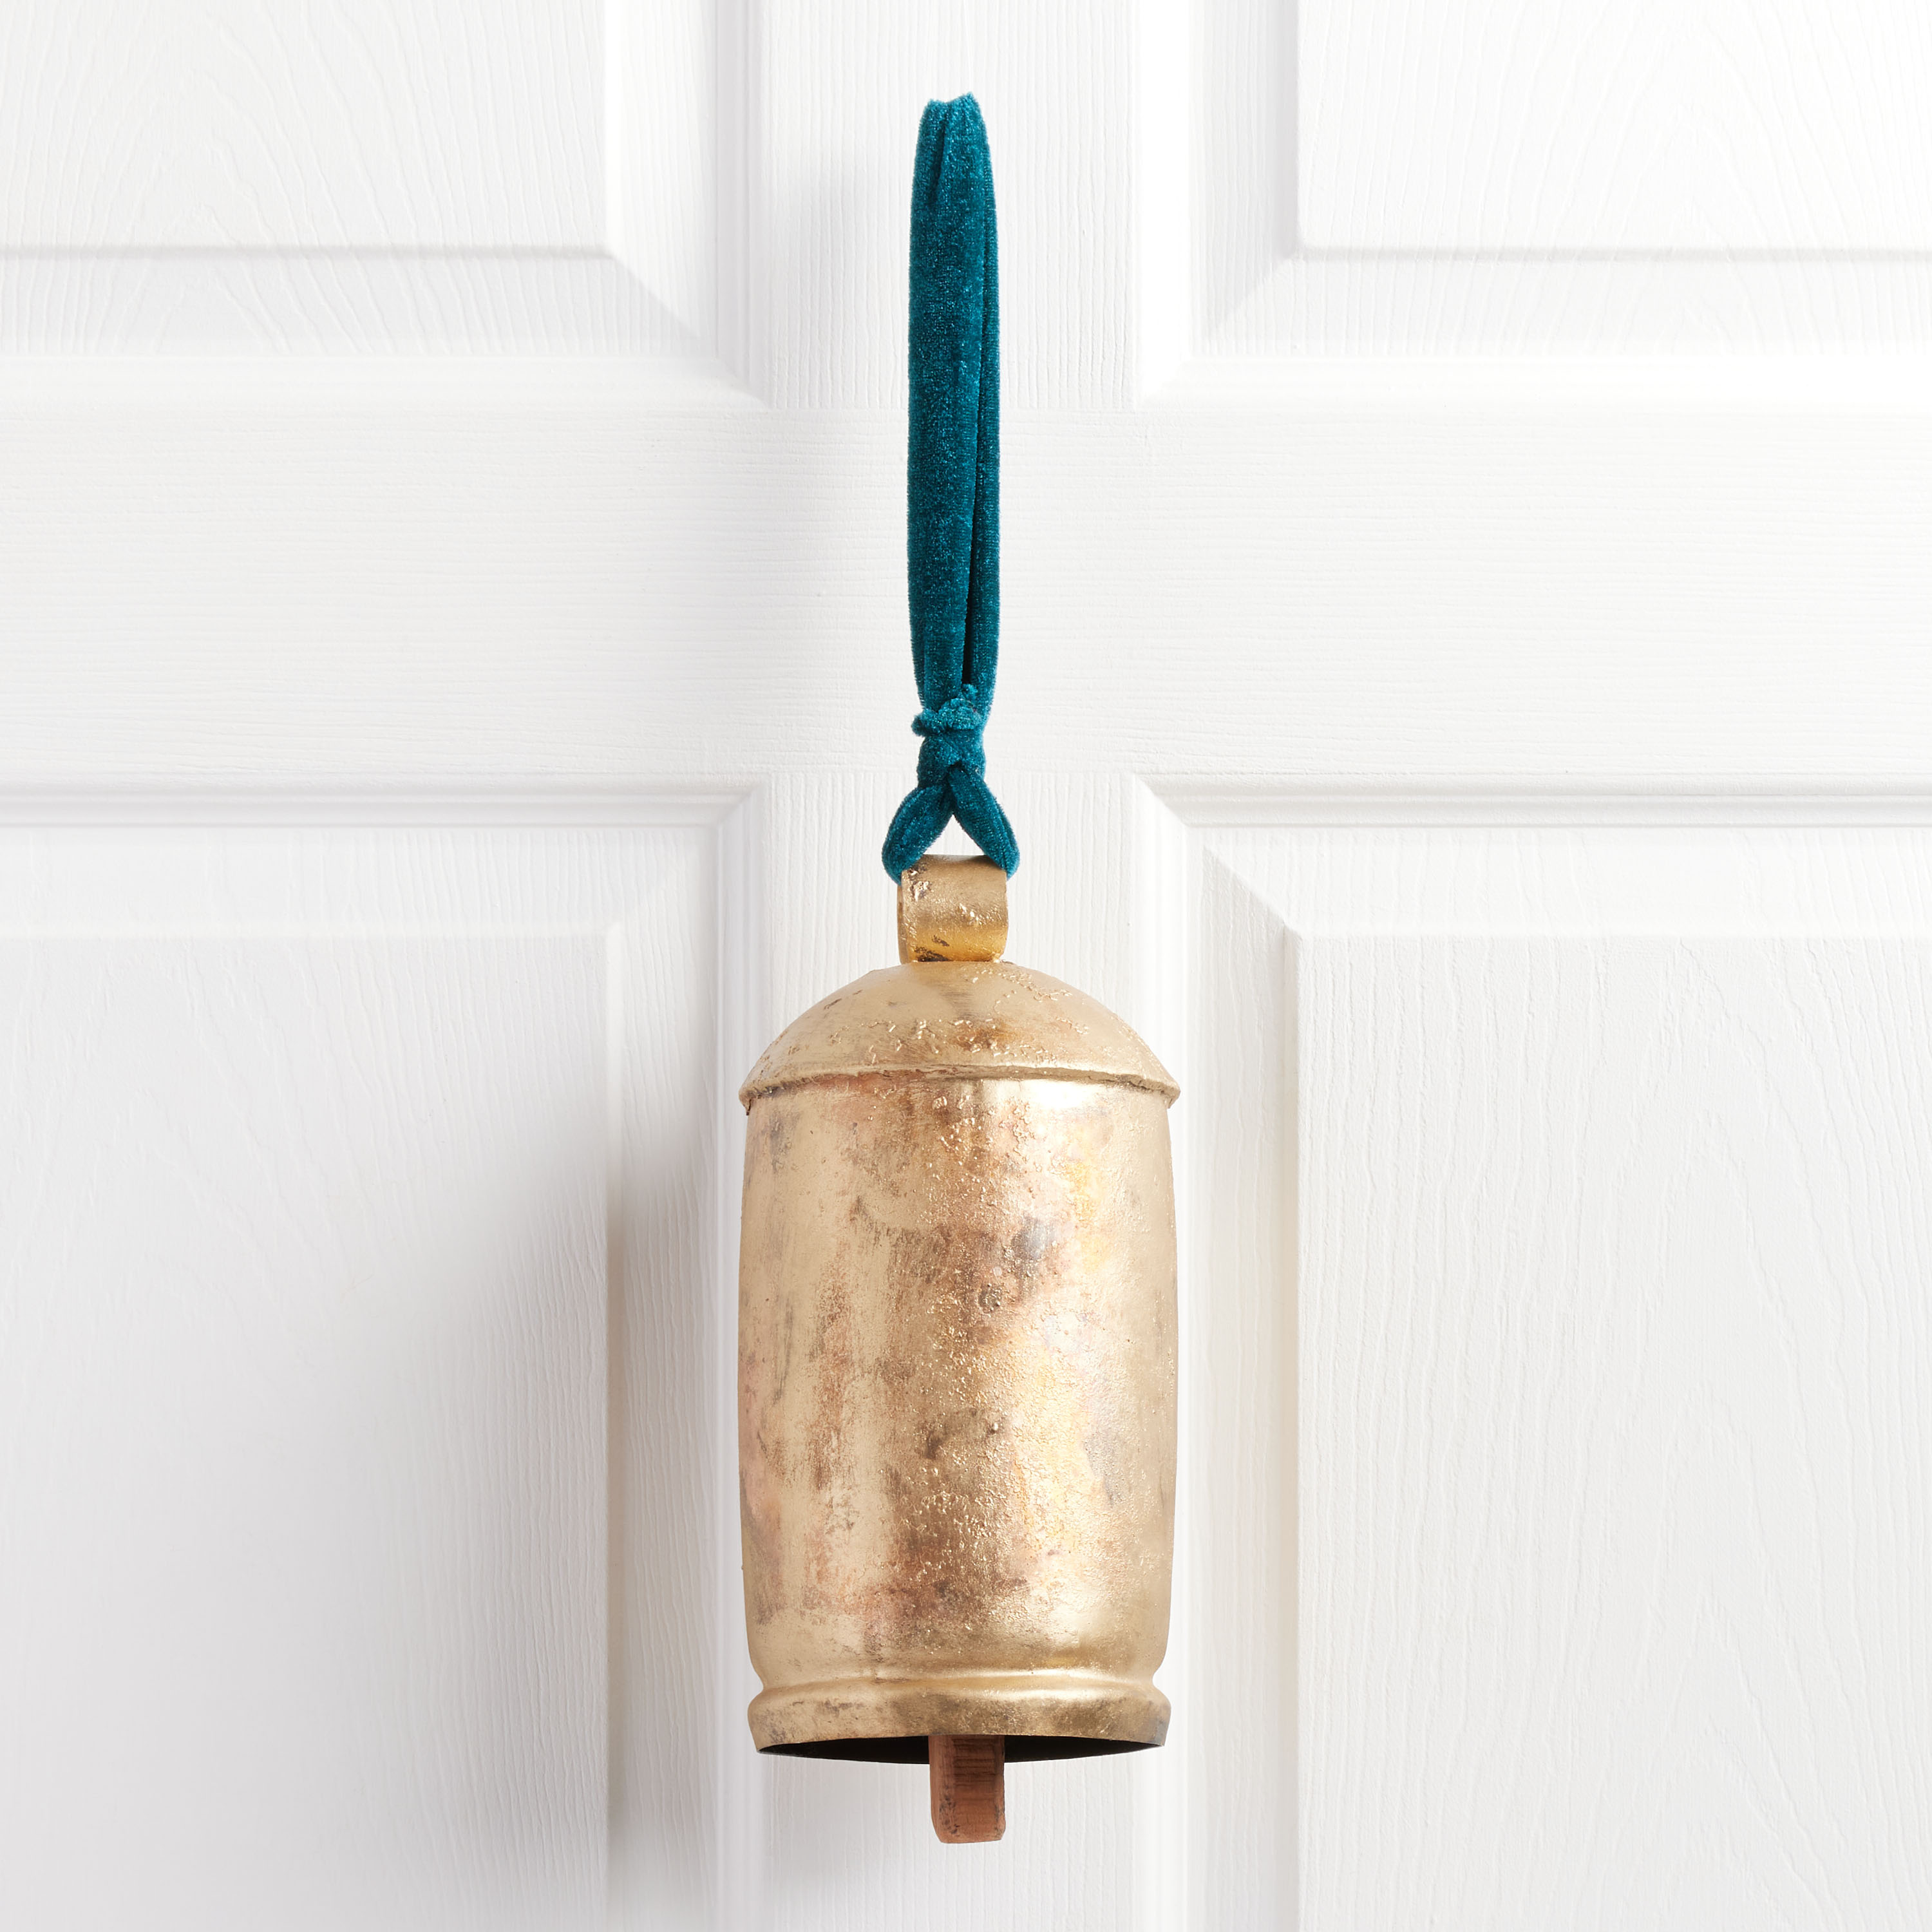 Shell and Bell Hanging Decor - World Market